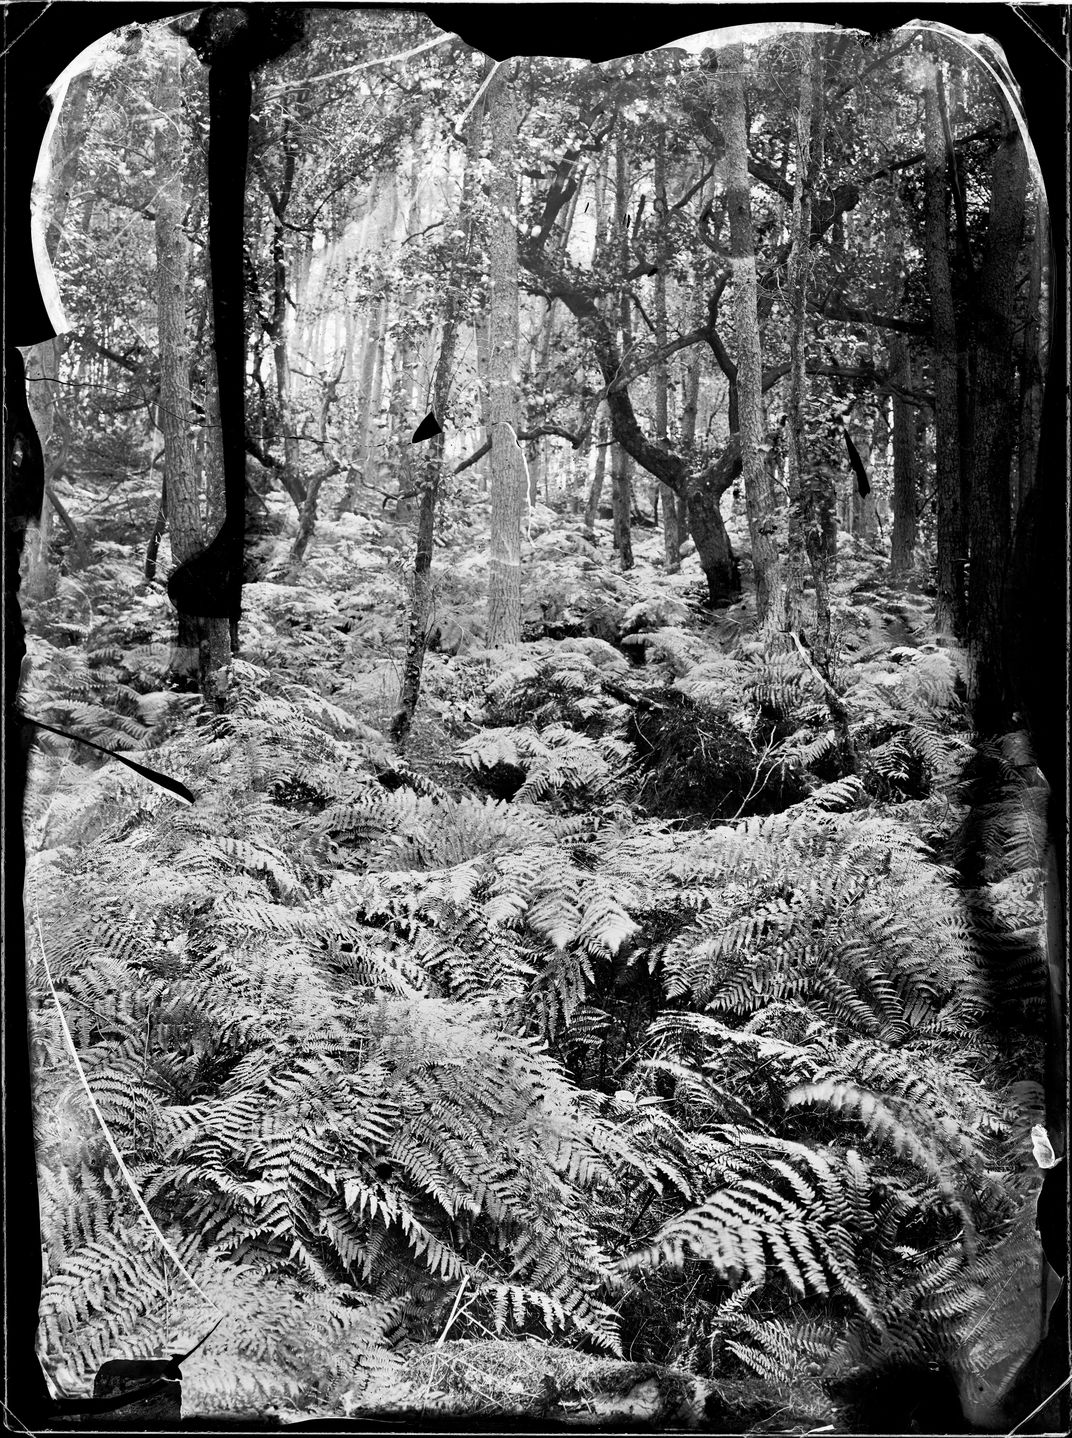 Trees among the ferns